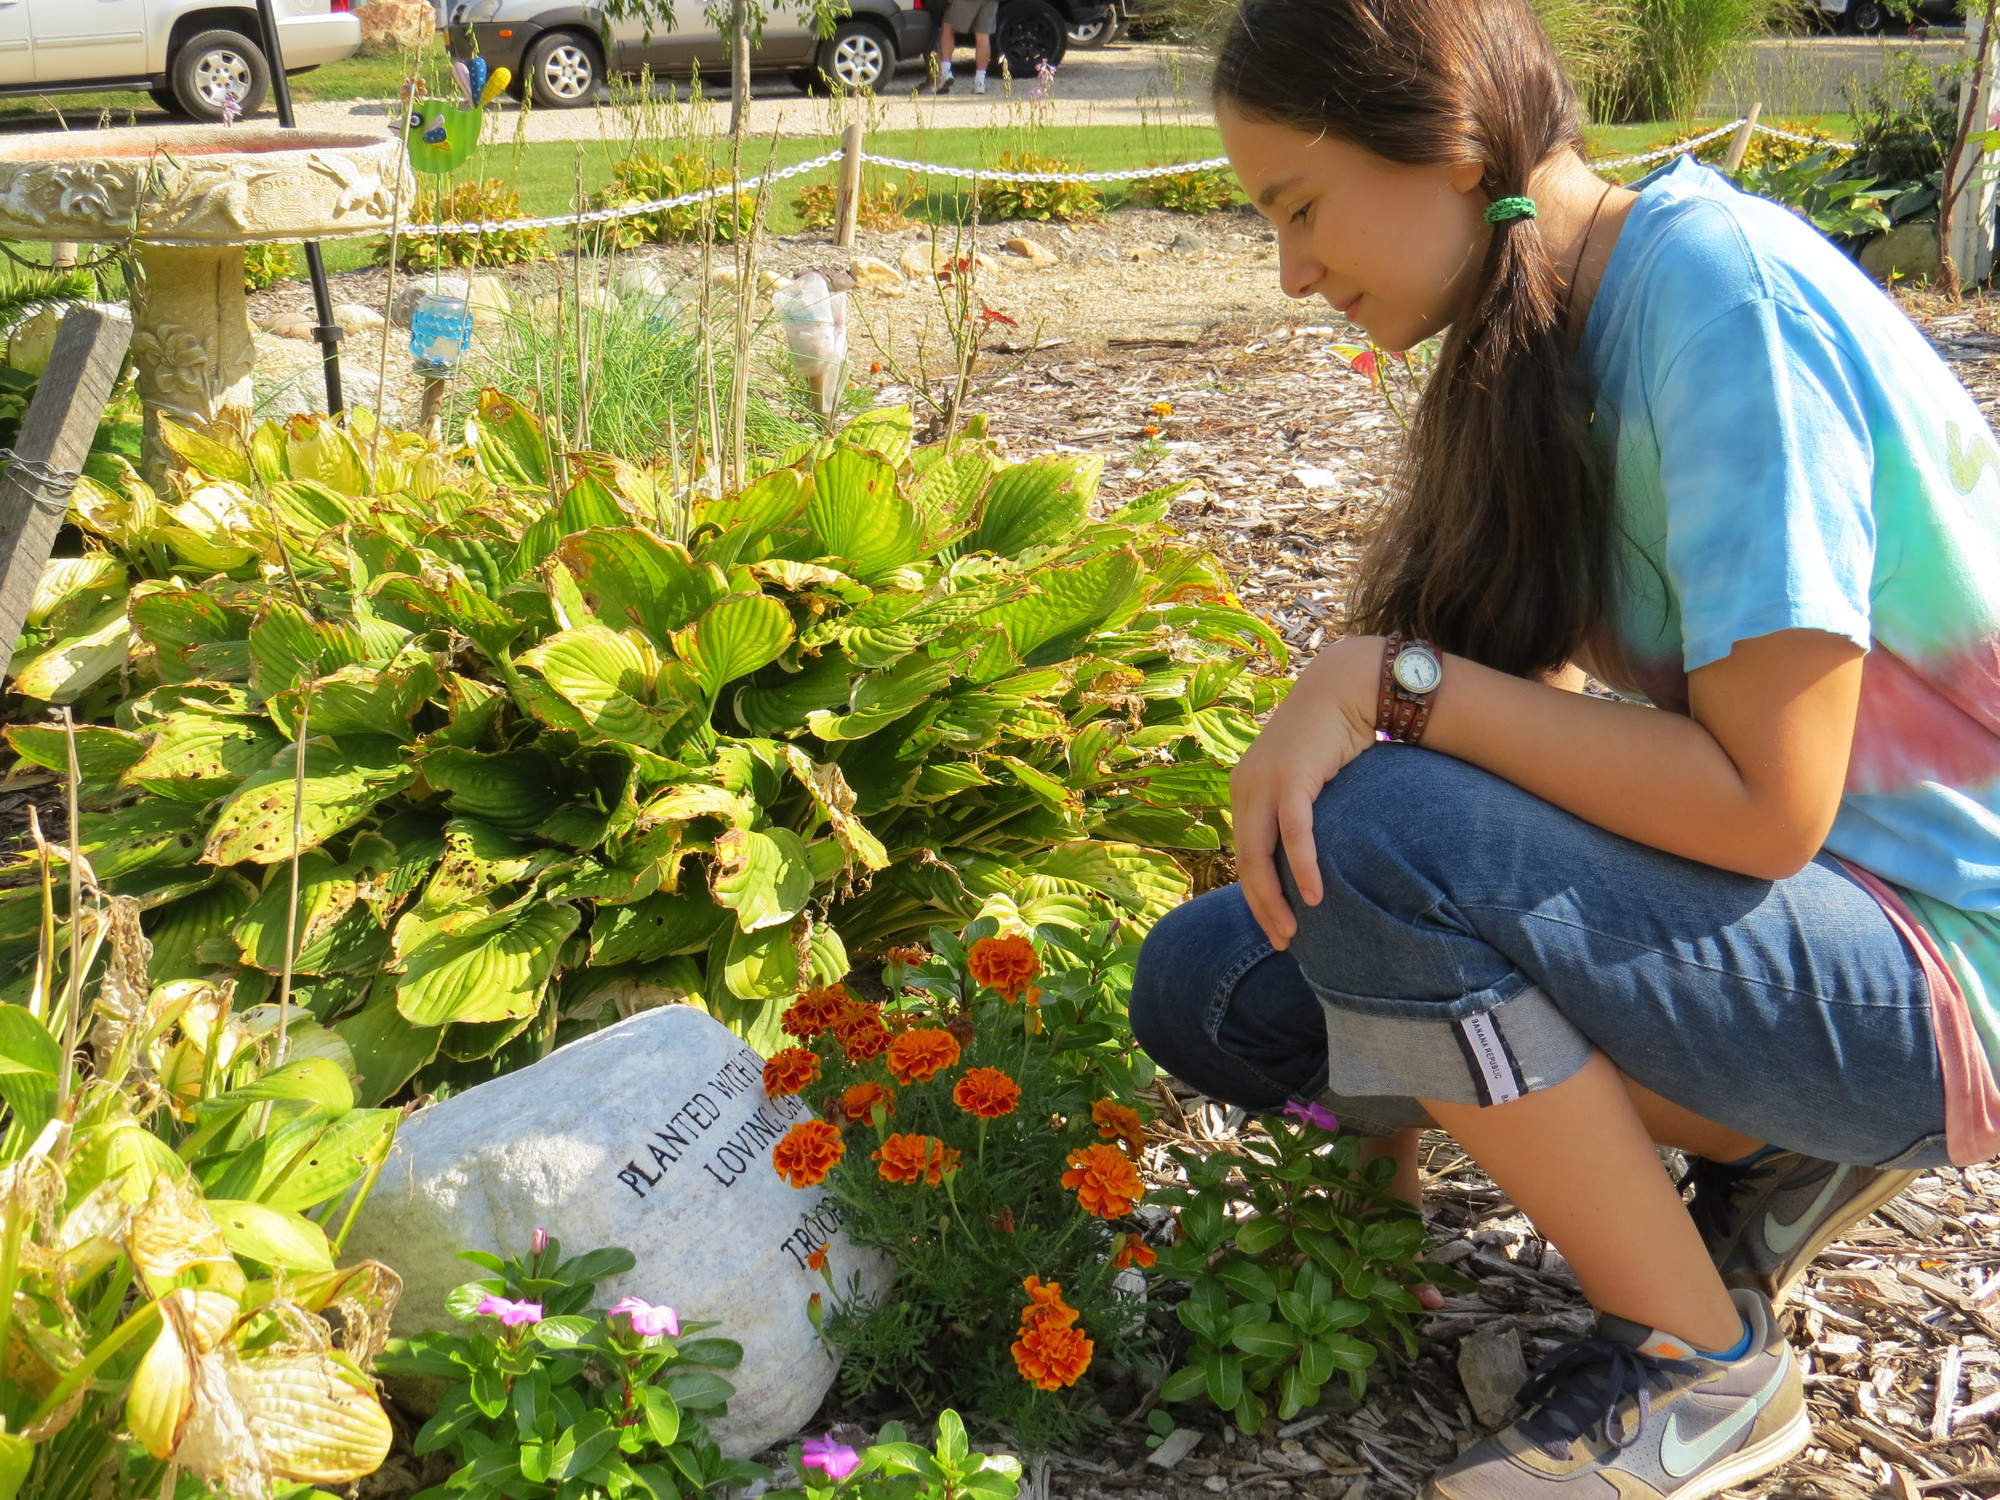 Caroline Smolensky made a butterfly garden in memory of her friend Theresa who dedicated much of her time to the garden at The Farm in Oyster Bay.